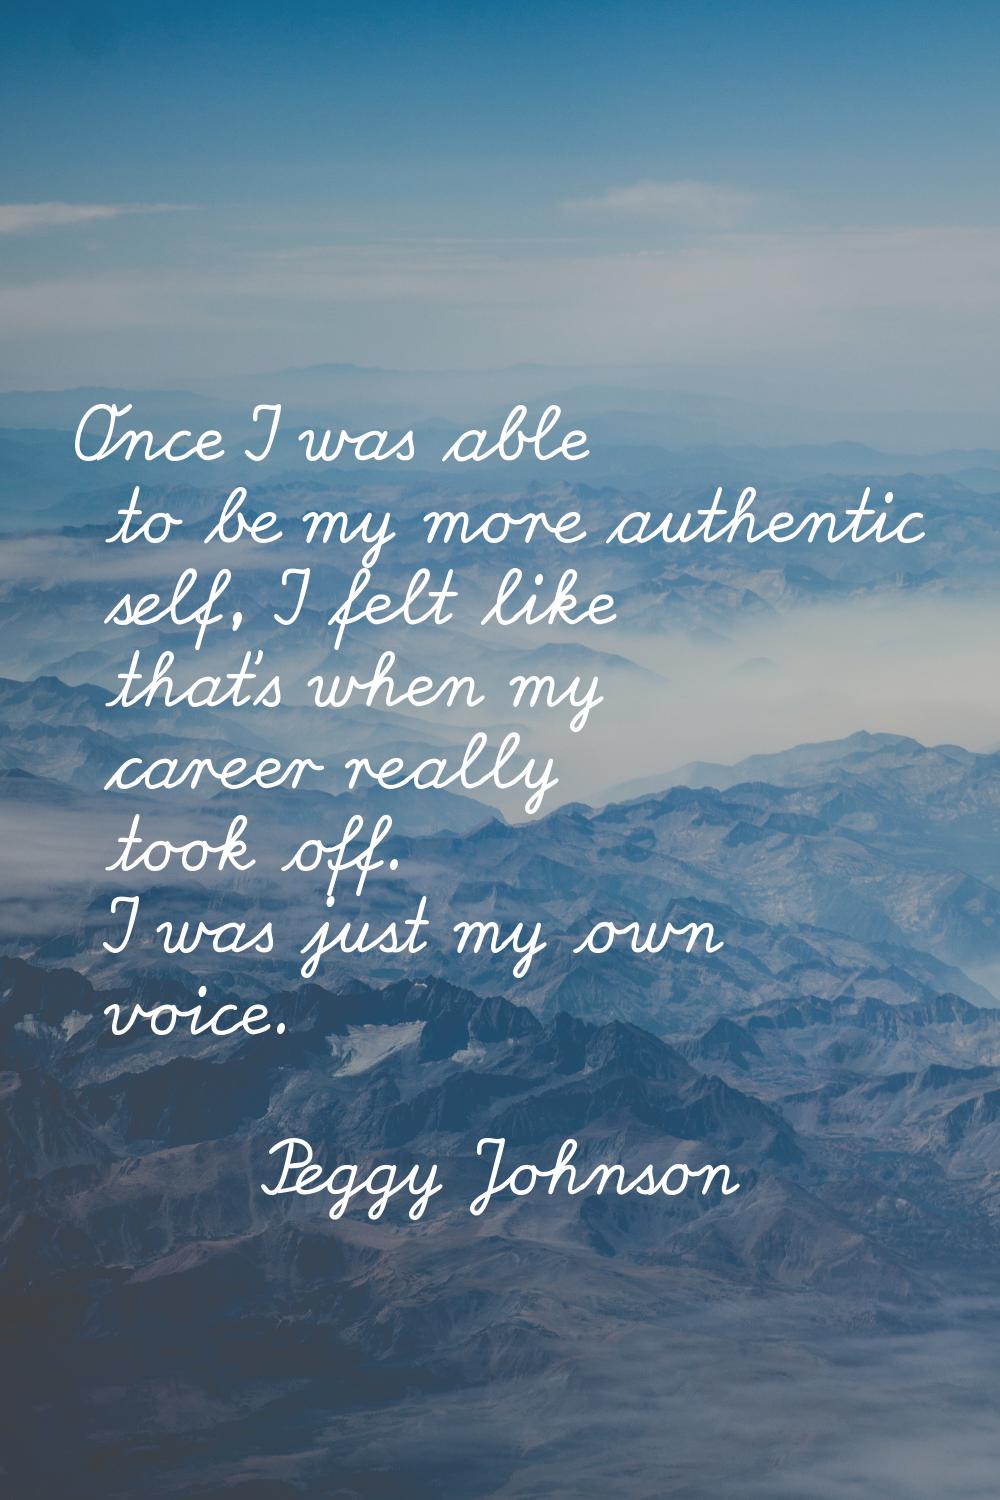 Once I was able to be my more authentic self, I felt like that's when my career really took off. I 